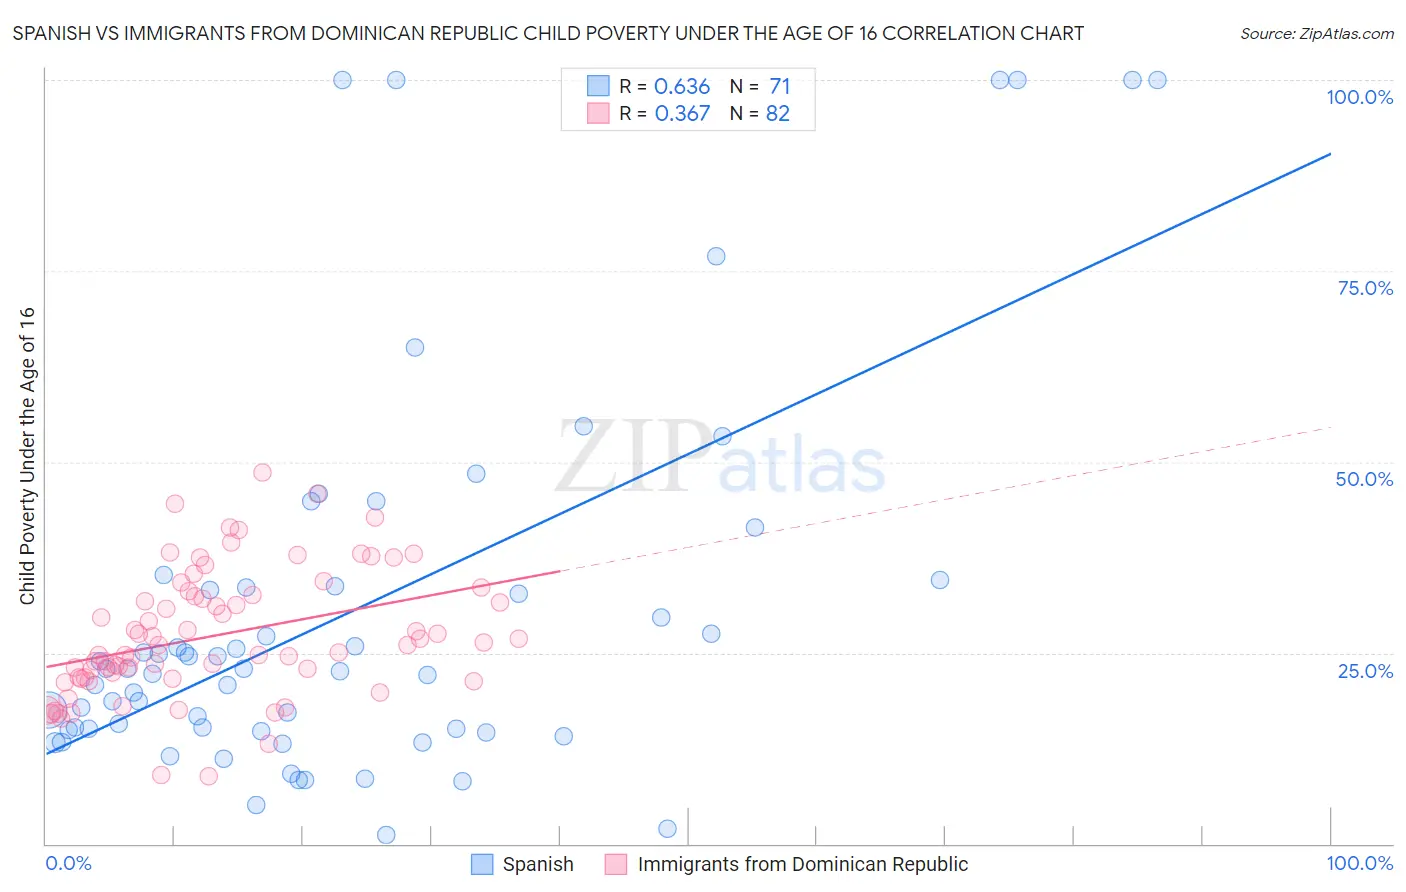 Spanish vs Immigrants from Dominican Republic Child Poverty Under the Age of 16